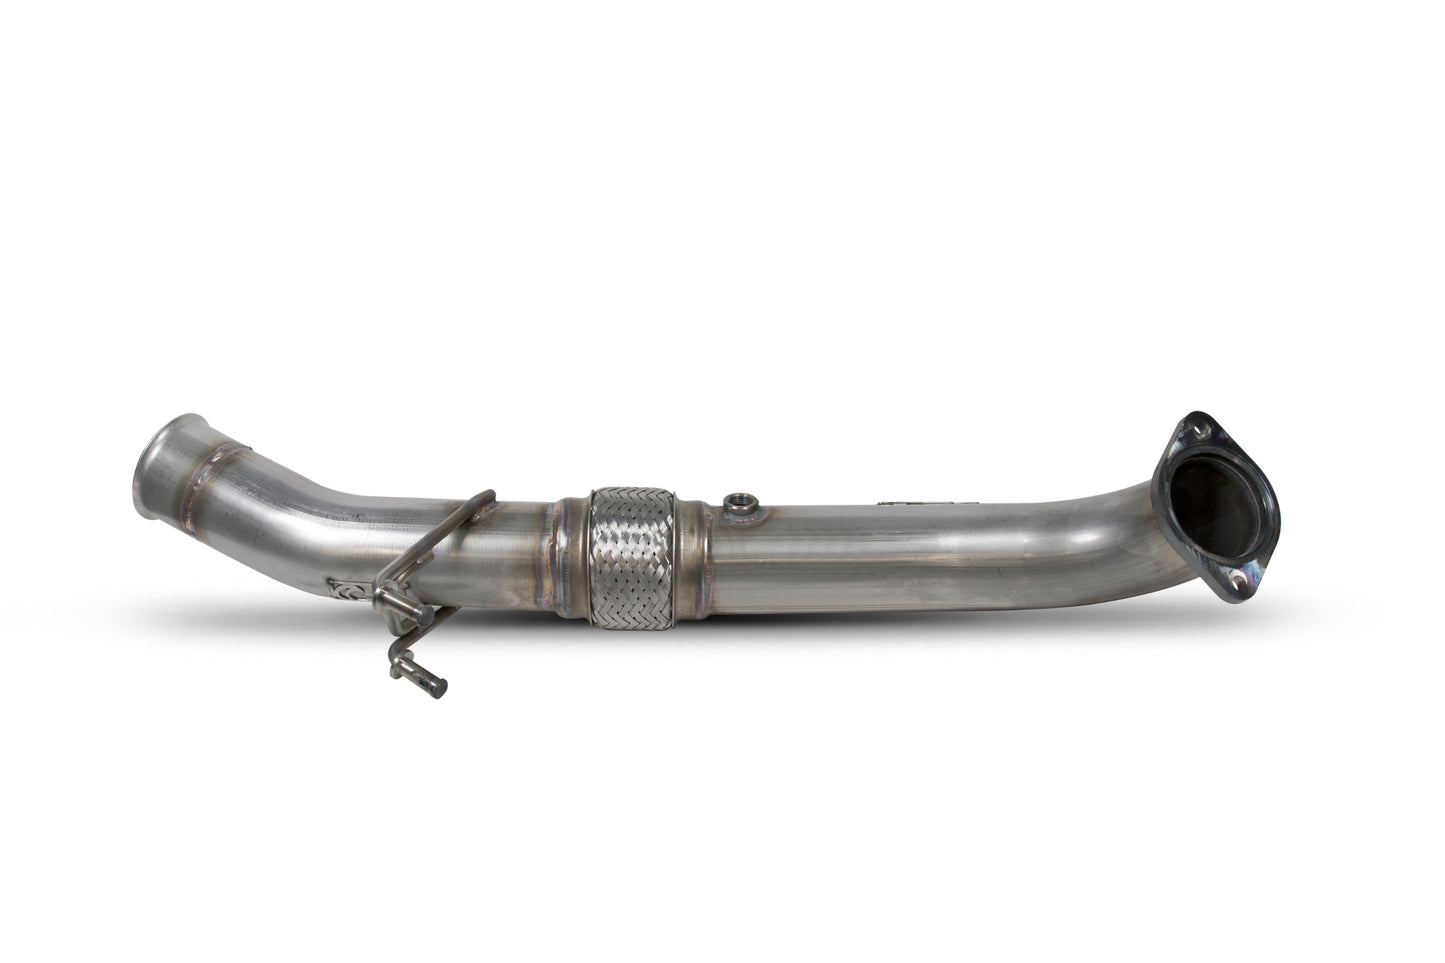 Scorpion Decat Downpipe - Ford Focus Mk3 RS (16-18)